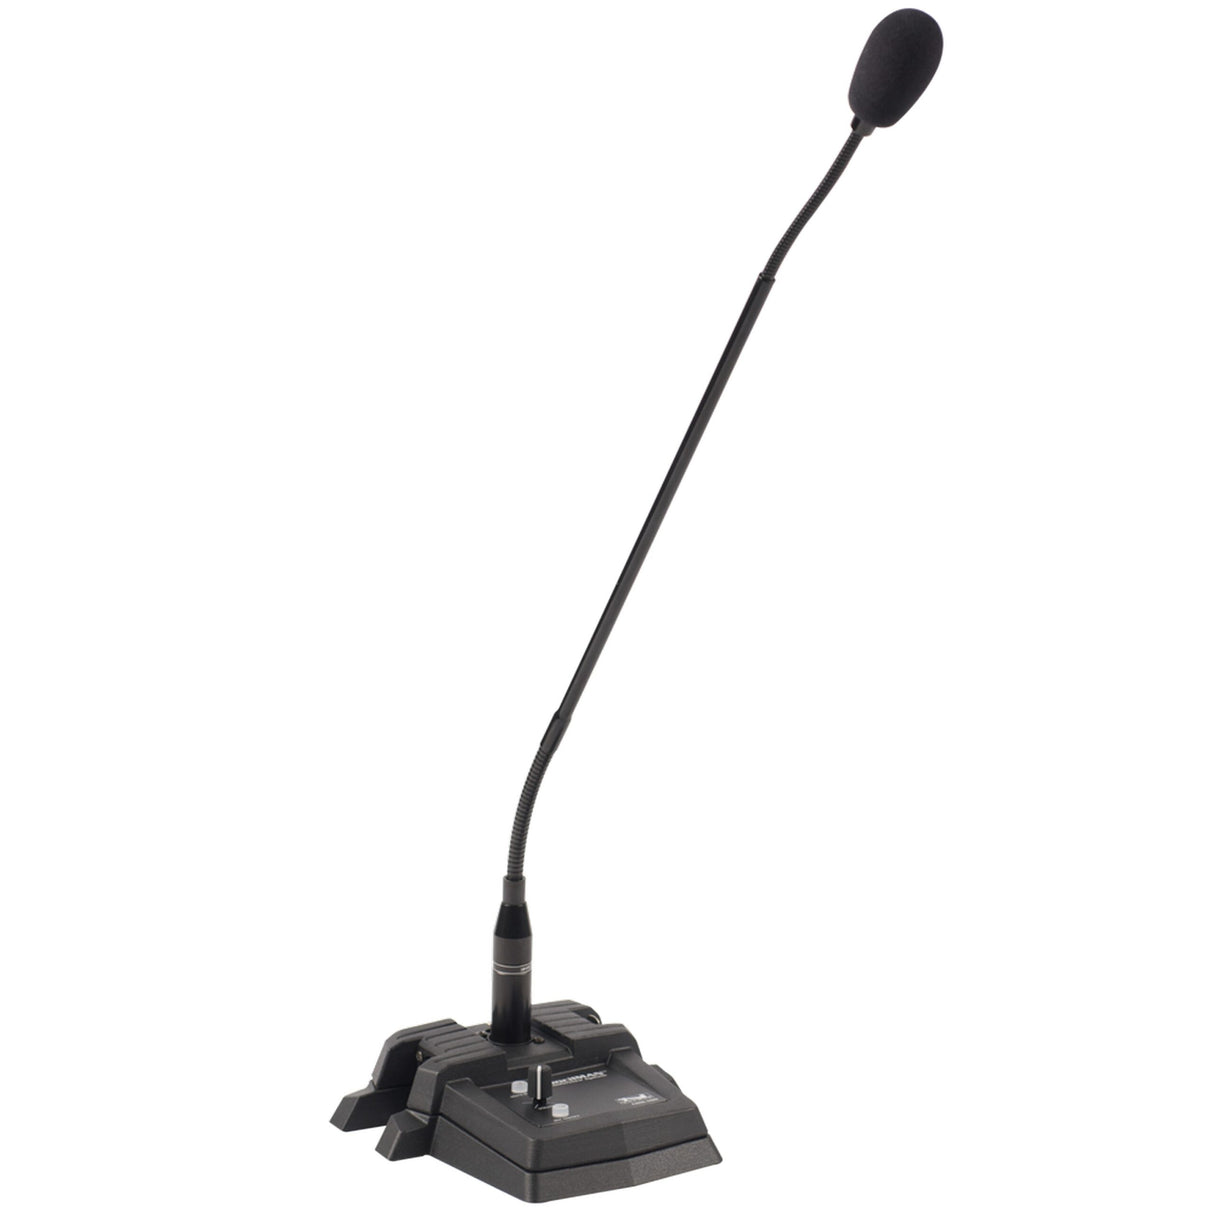 Anchor Audio CHM-100 Chairman Base and 18-Inch Gooseneck Microphone